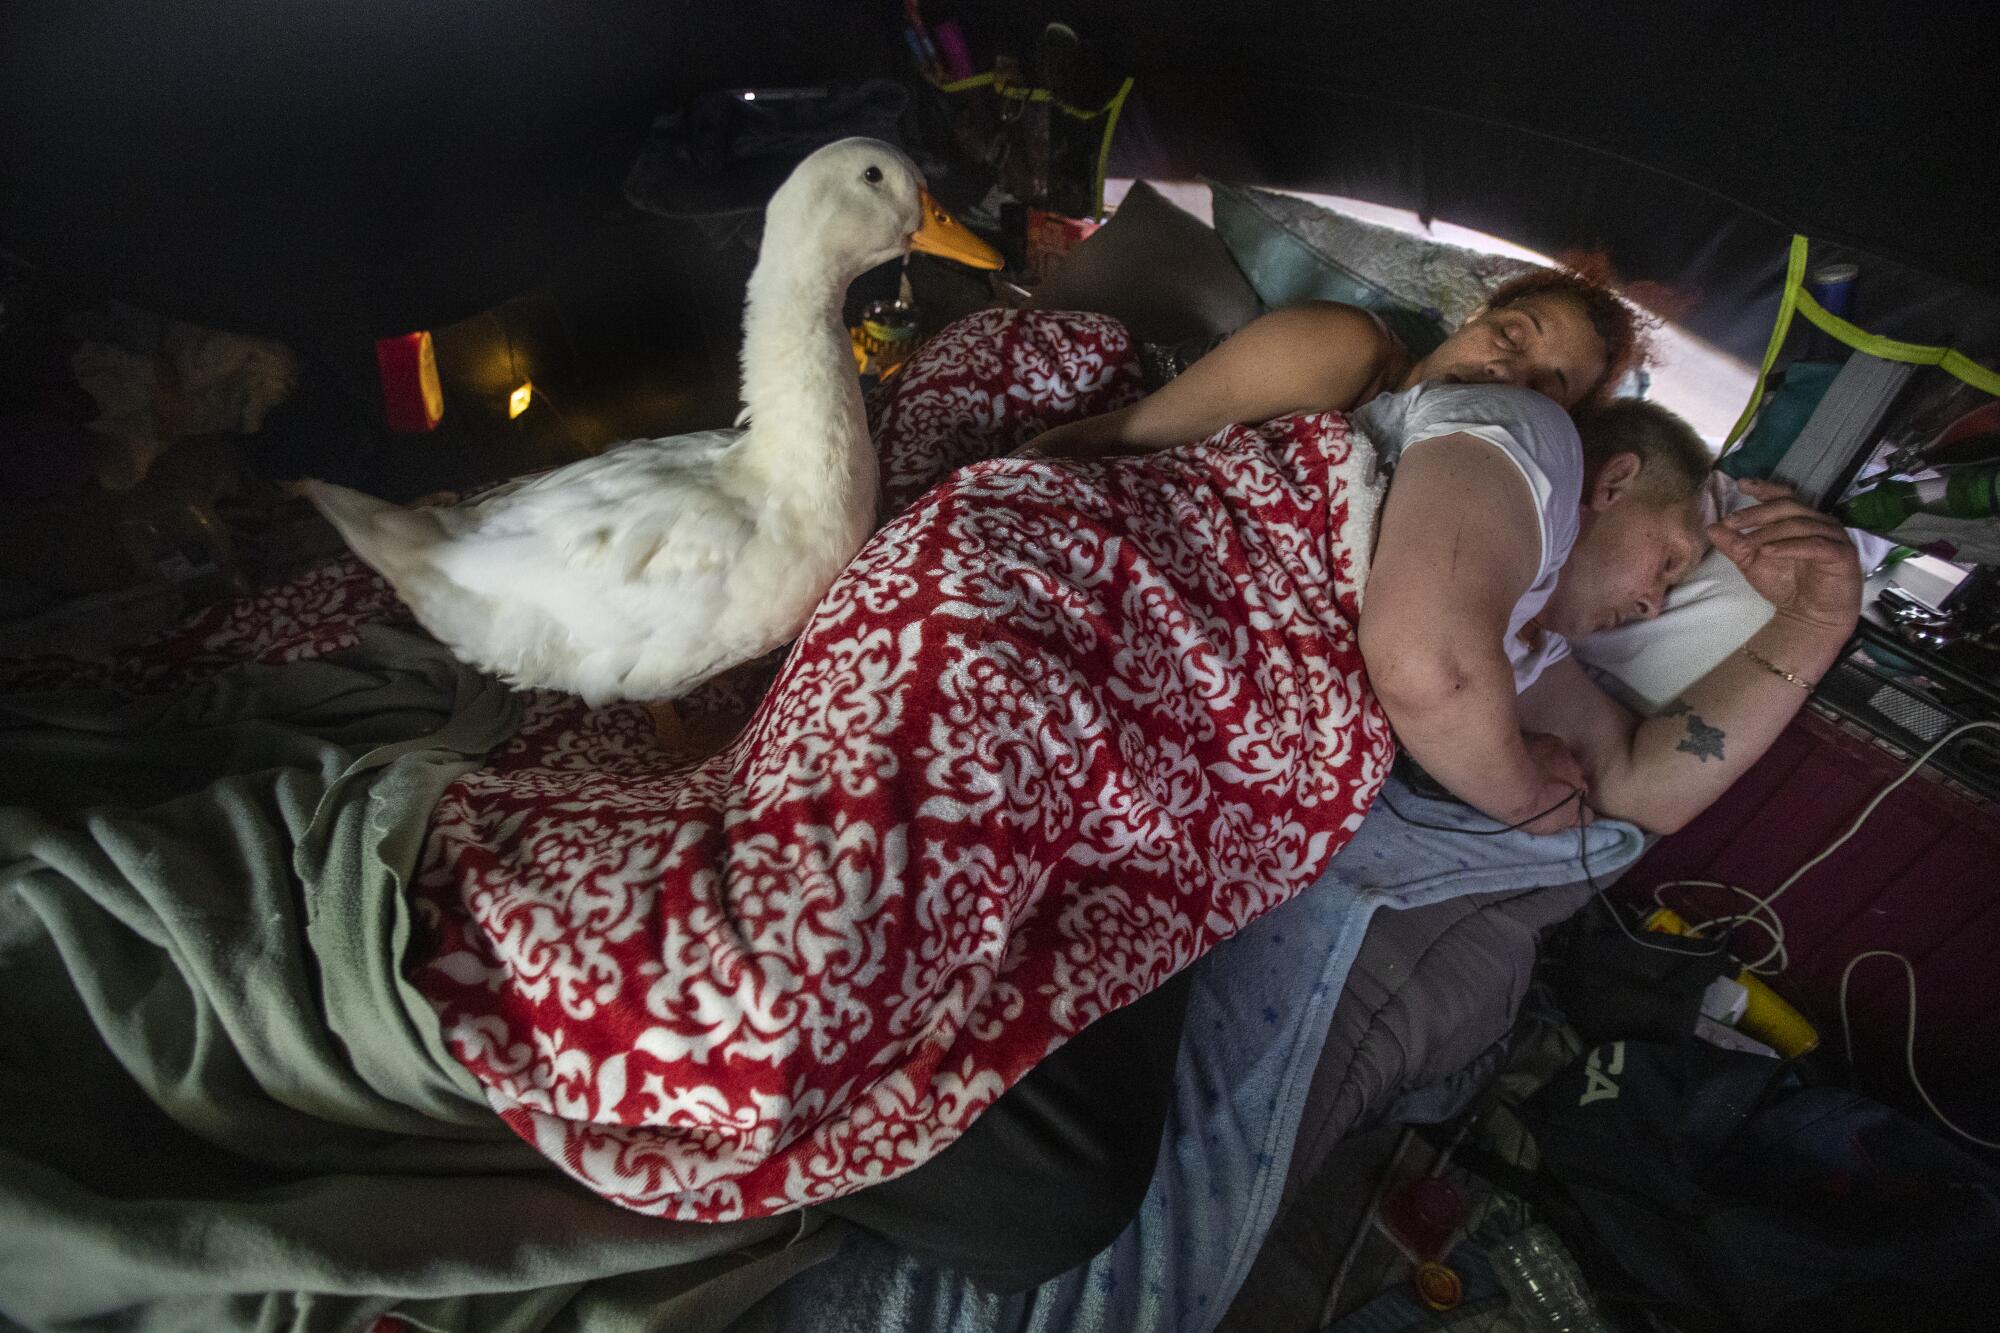 Cardi D, a male Pekin duck, sits on the bed as Autumn Mcwilliams and her boy friend, Jack sleep inside their tent 